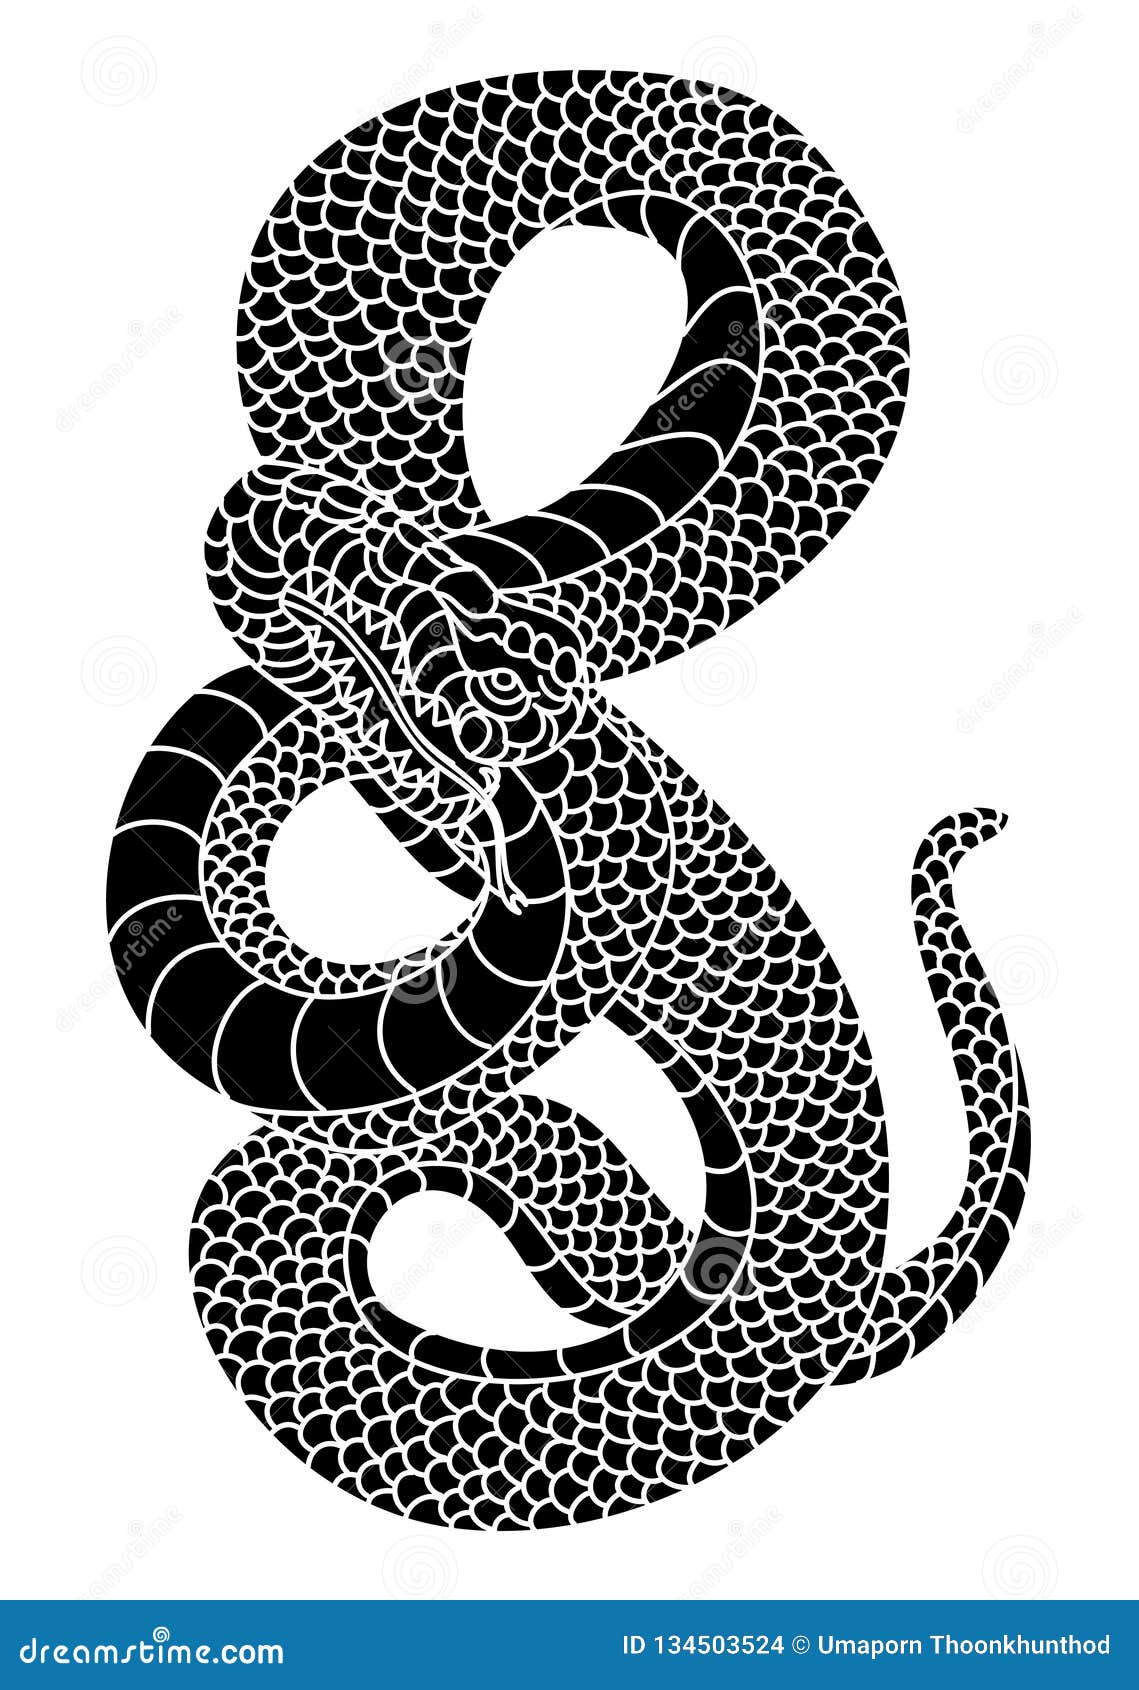 Chinese Snake Tattoo Designs  Chinese Temple